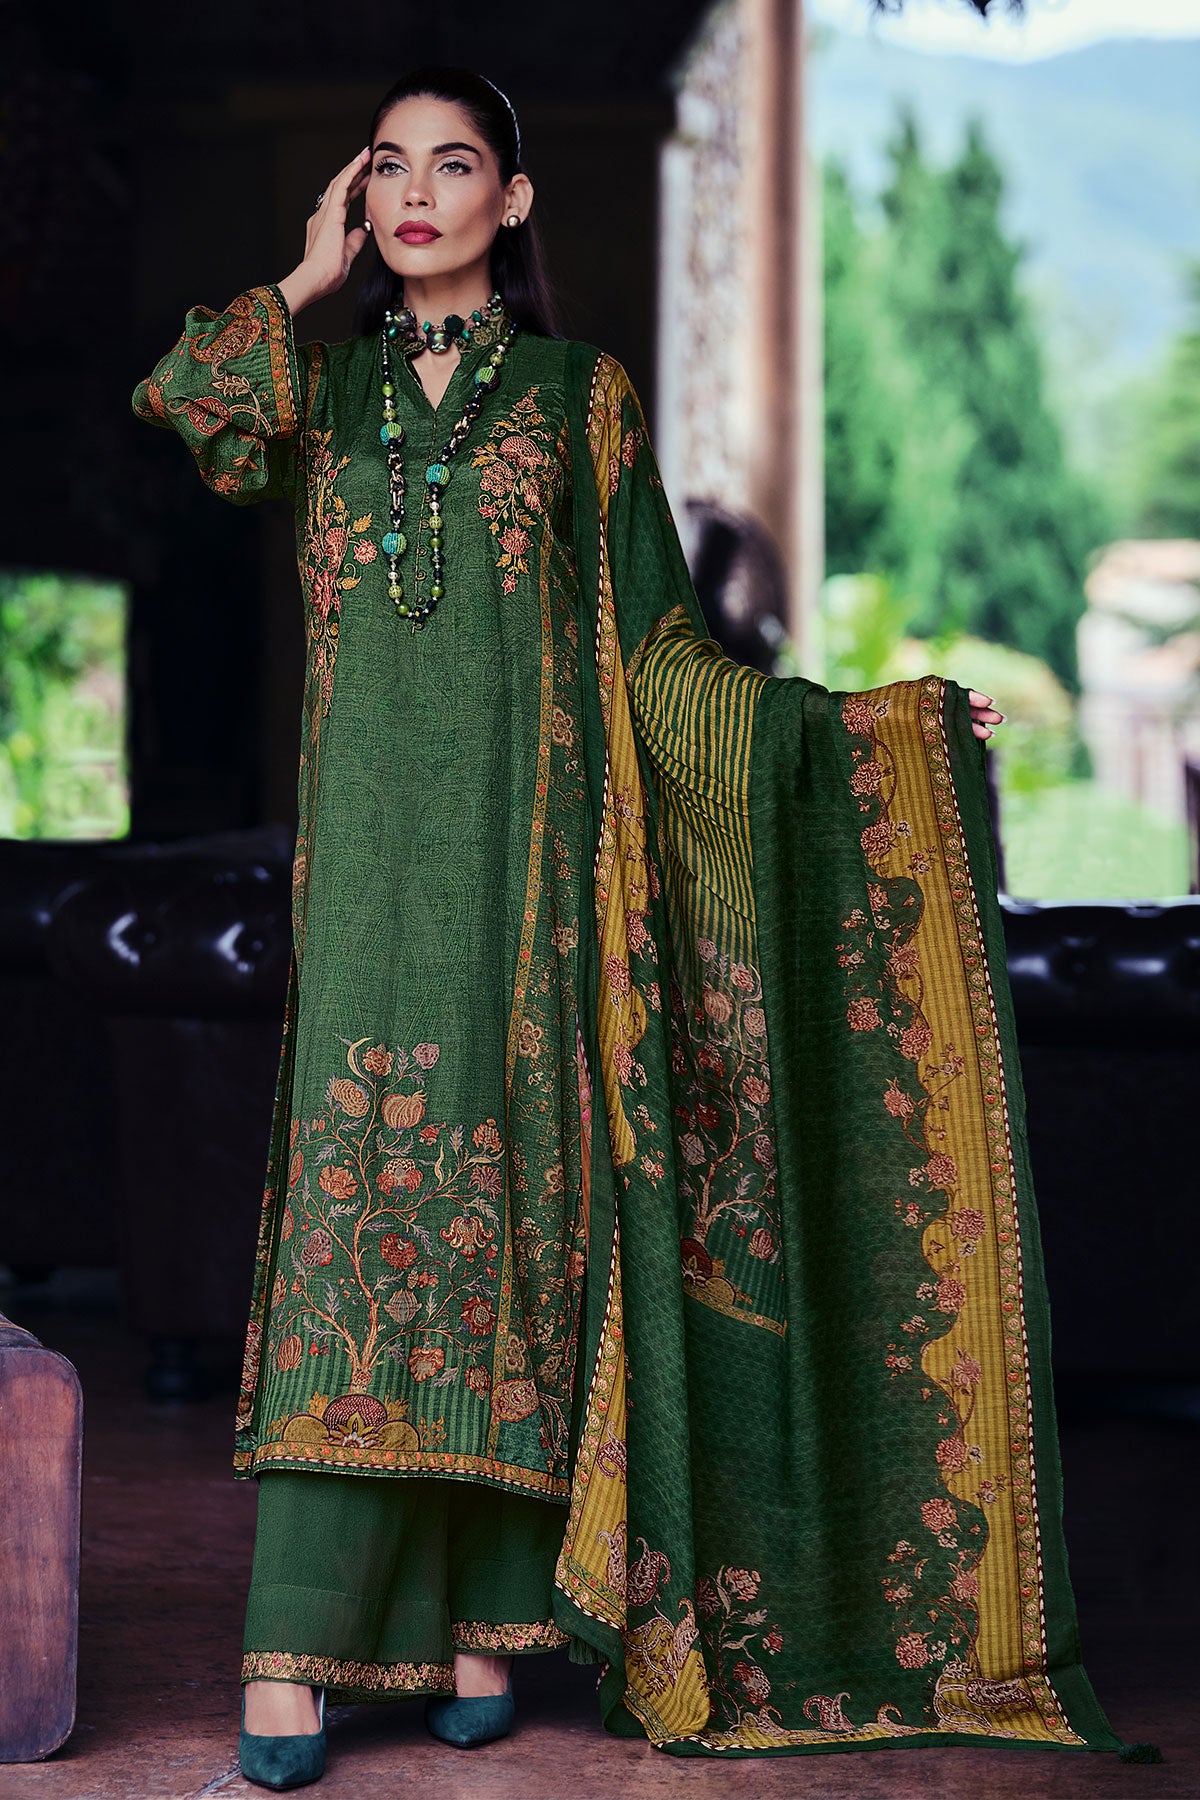 Bottle Green Blended Silk Floral Printed Floral Zari and Threadwork Embroidered Suit Set